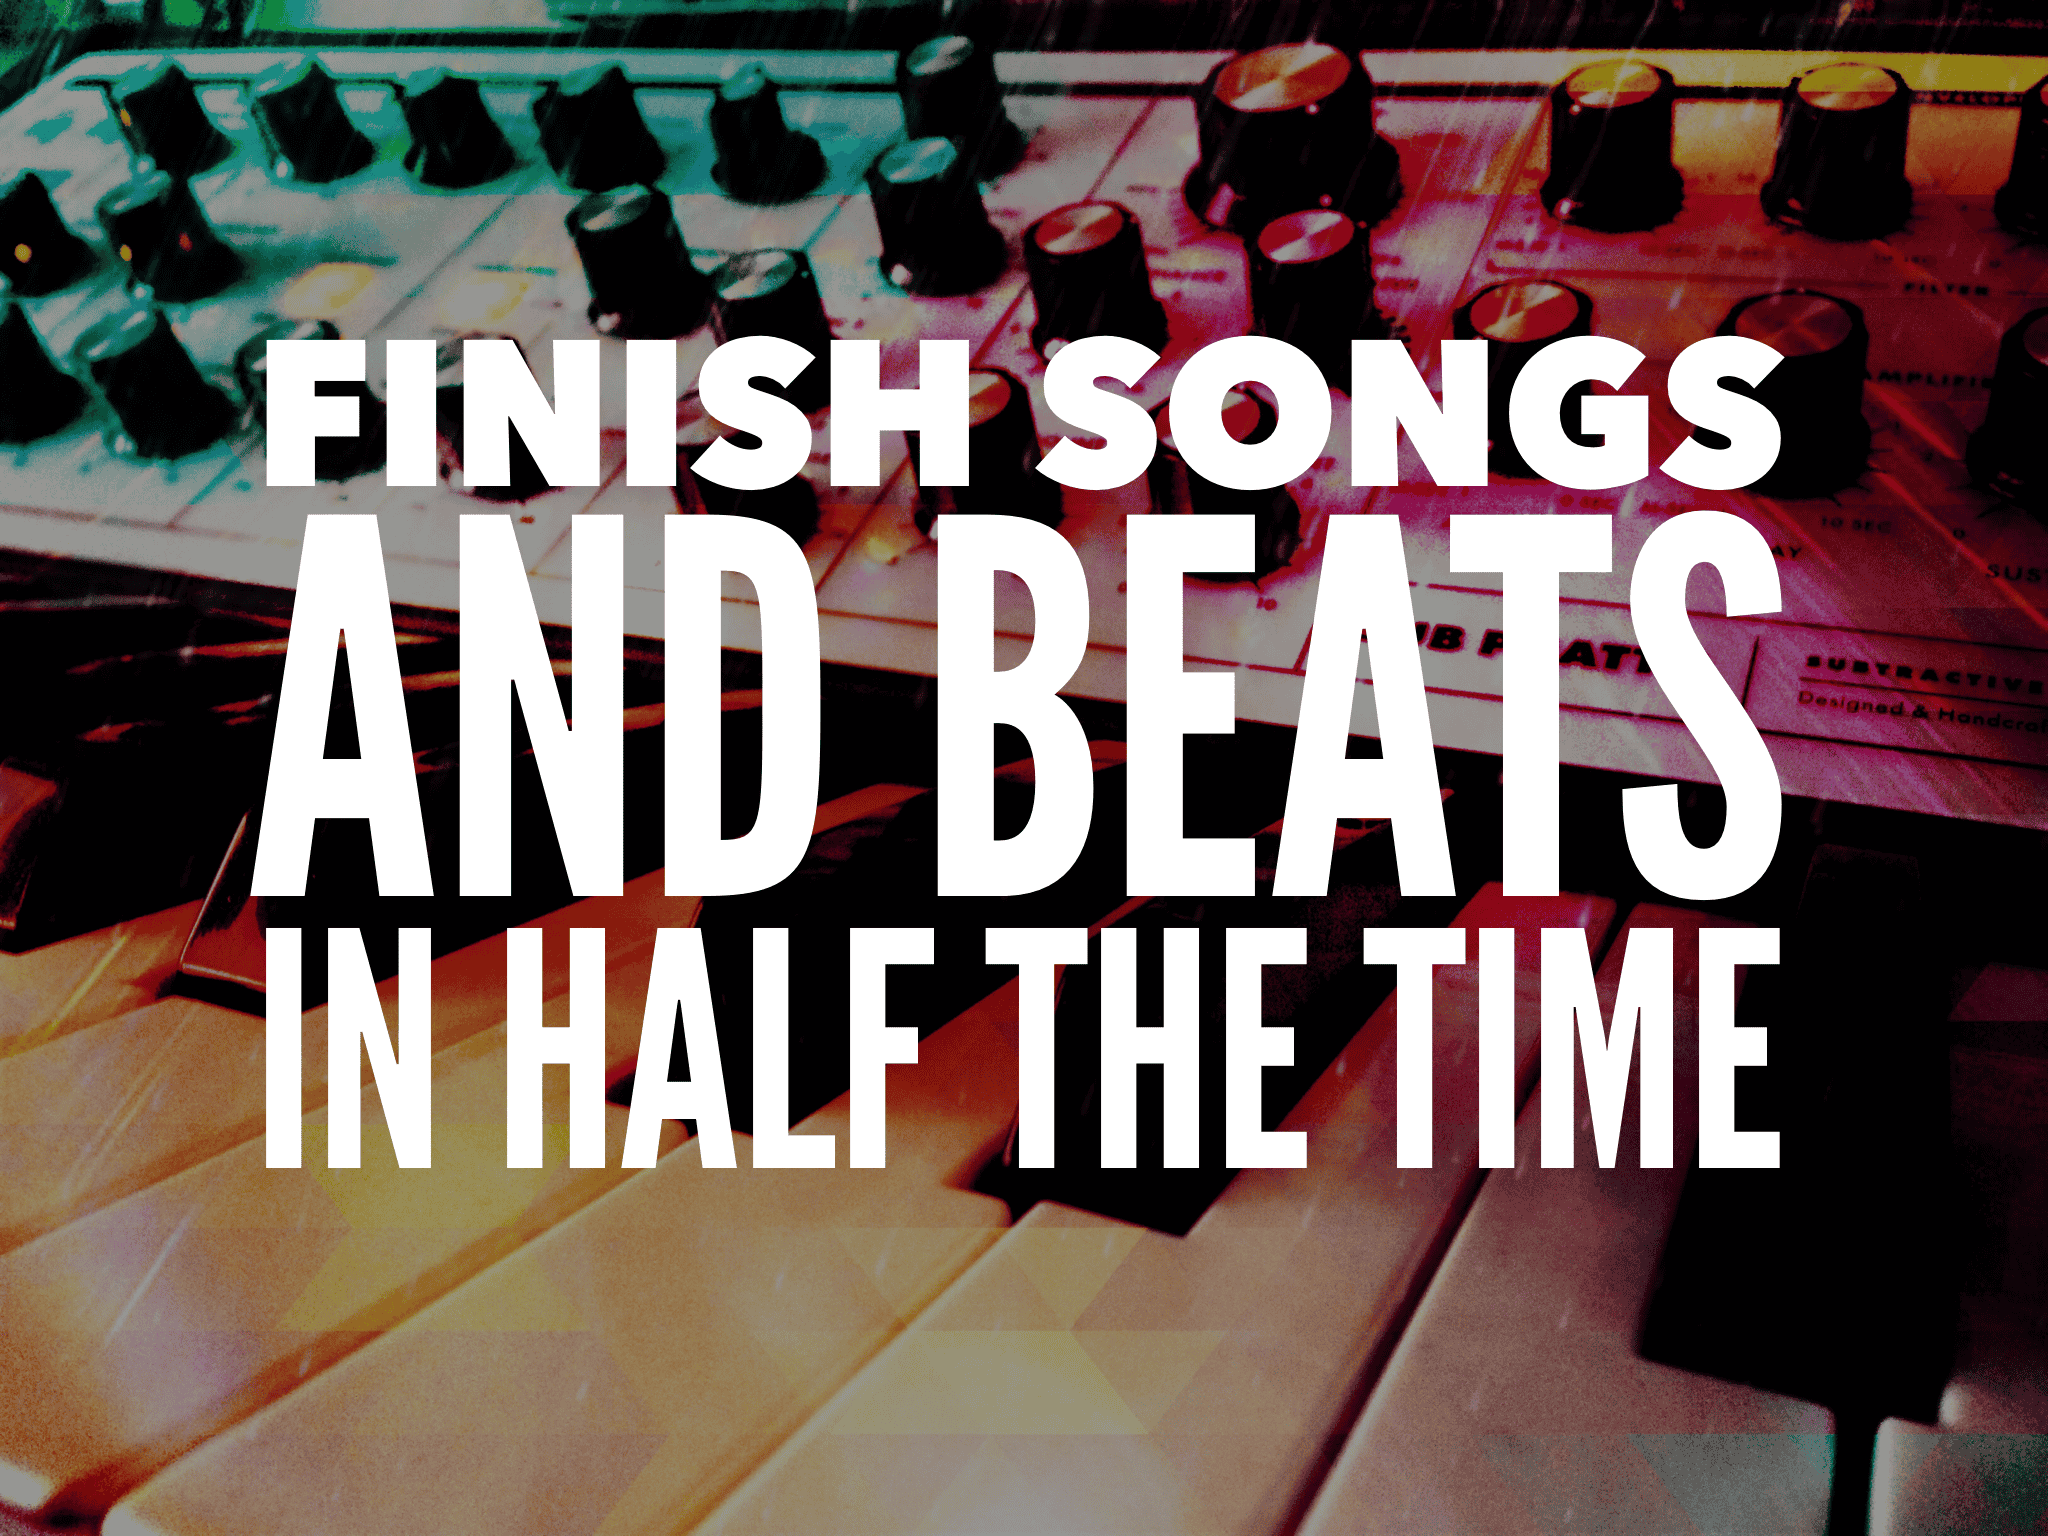 How To Finish A Song Or Beat In Half The Time